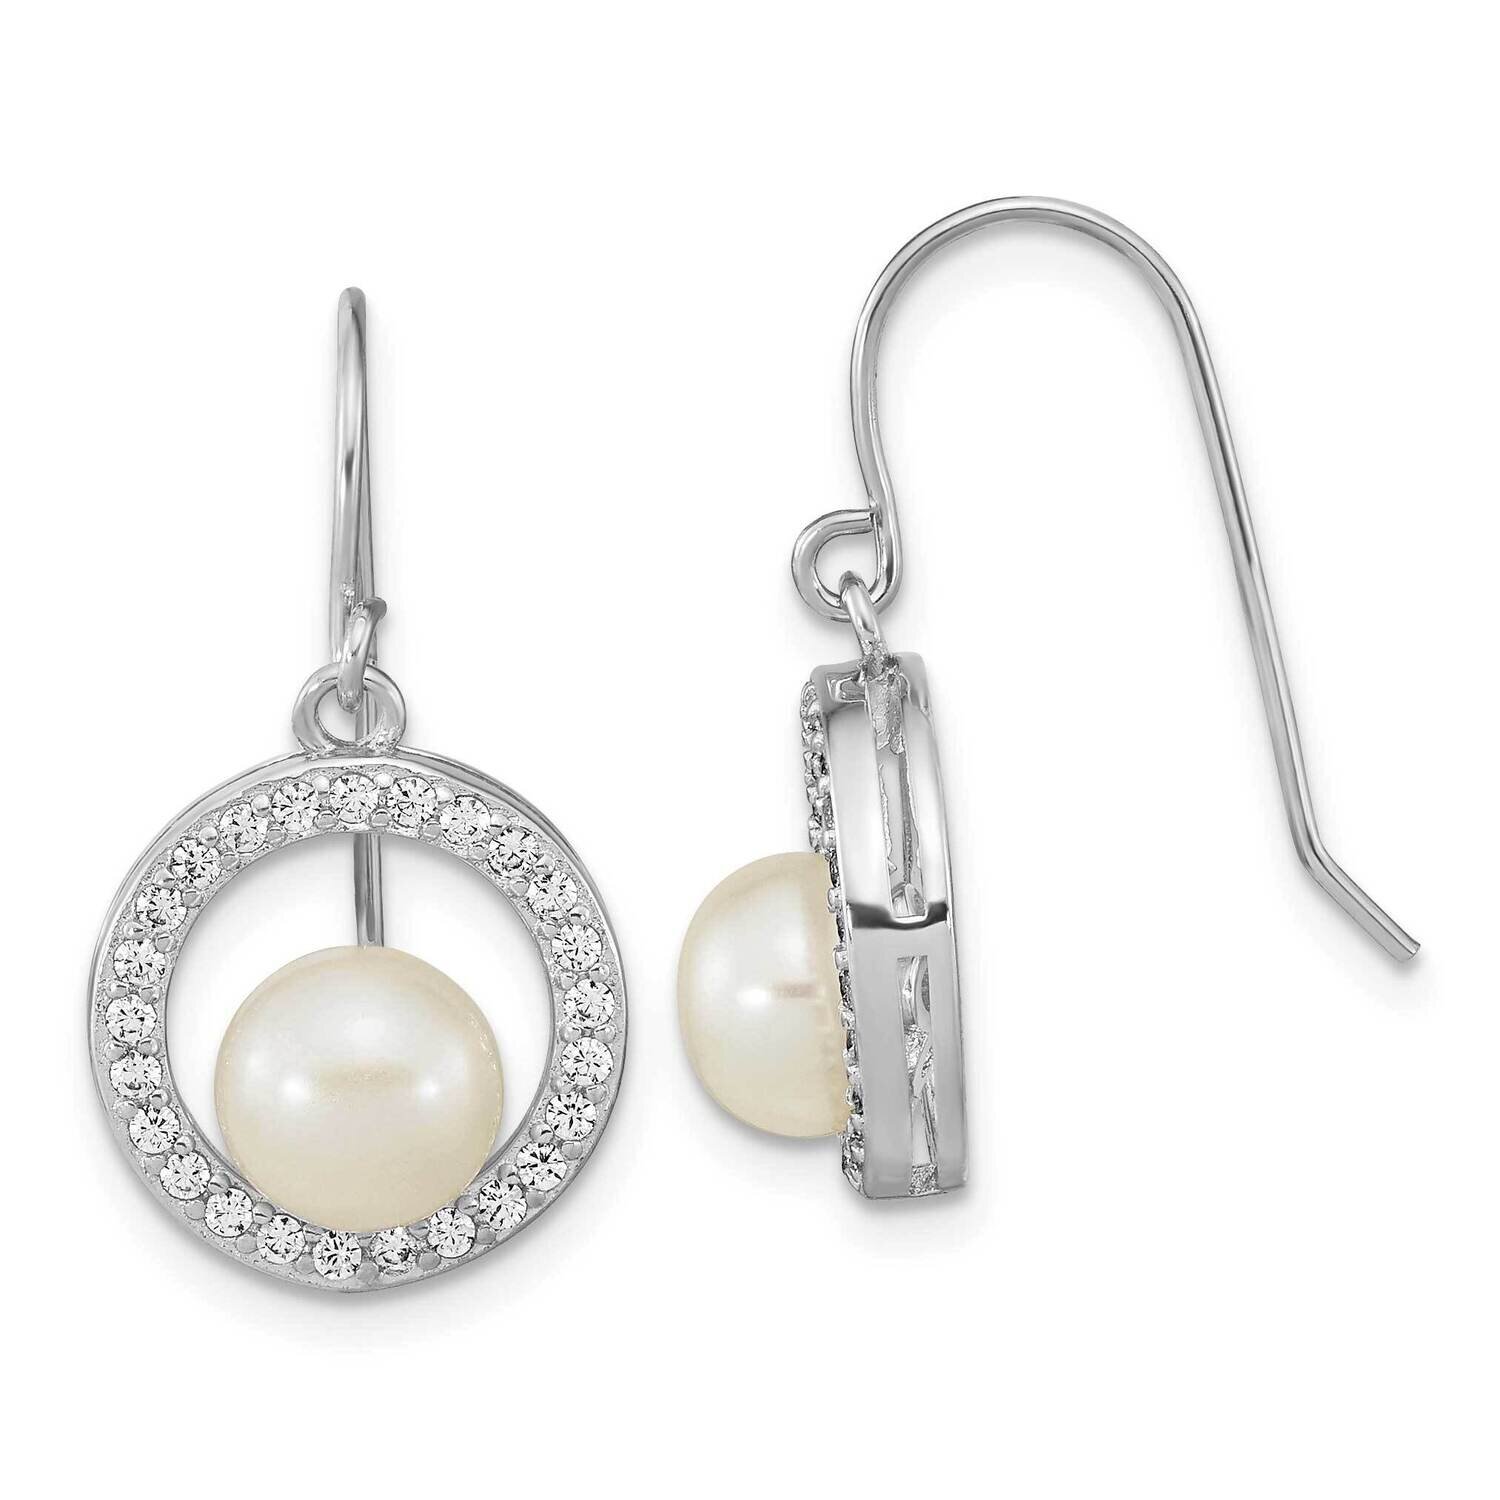 6-7mm Button Fwc Pearl CZ Diamond Dangle Earrings Sterling Silver Rhodium-Plated QE16371